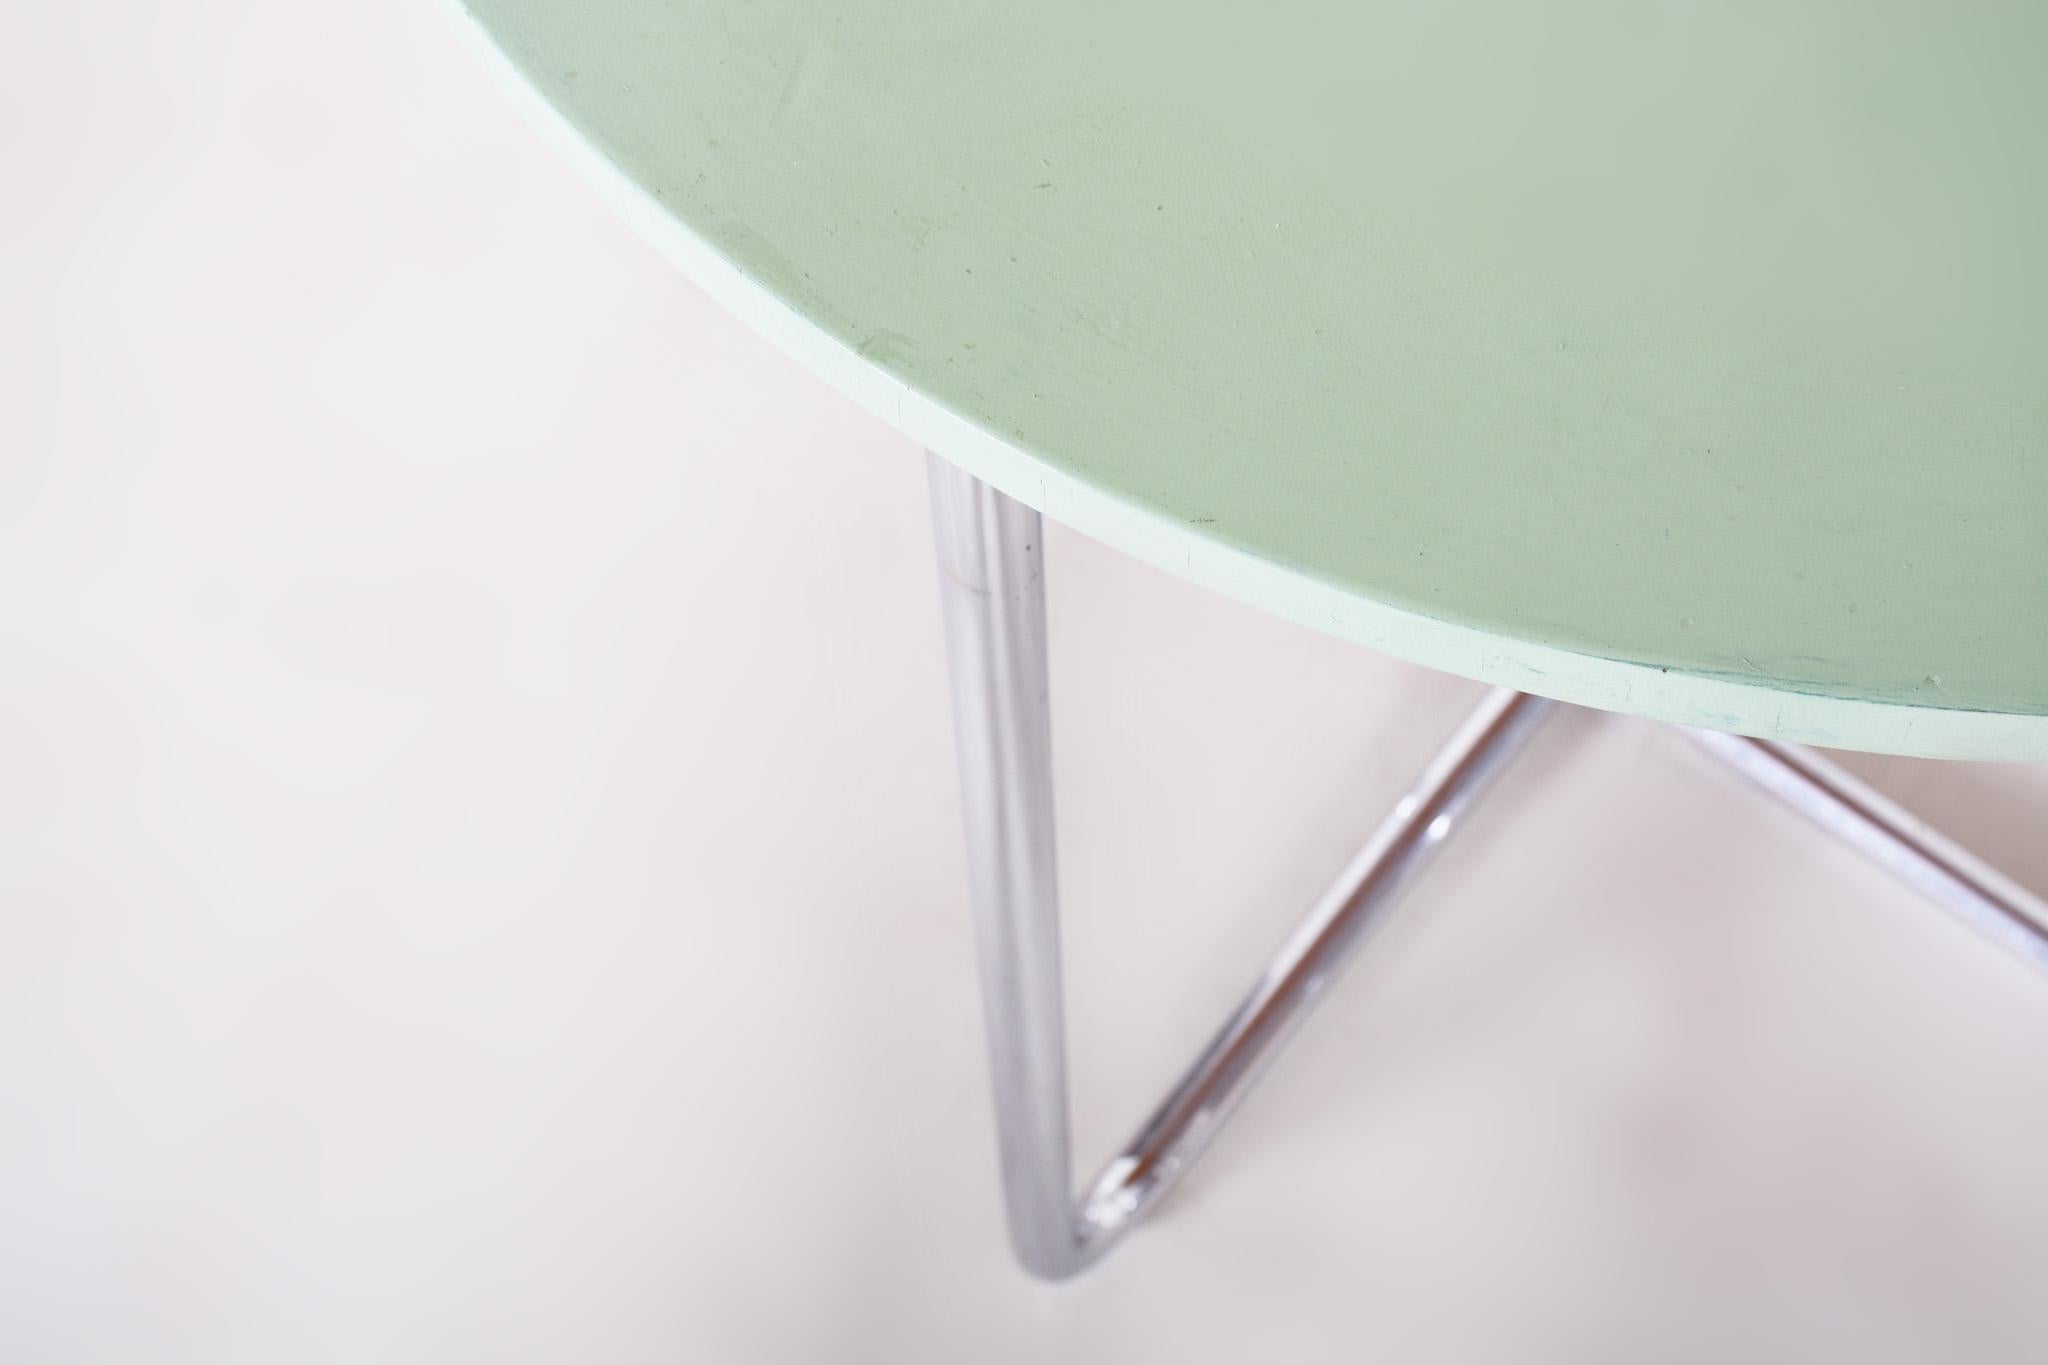 Chrome Czech Bauhaus Green Rounded Table, 1930s, Original Very Well Condition For Sale 2